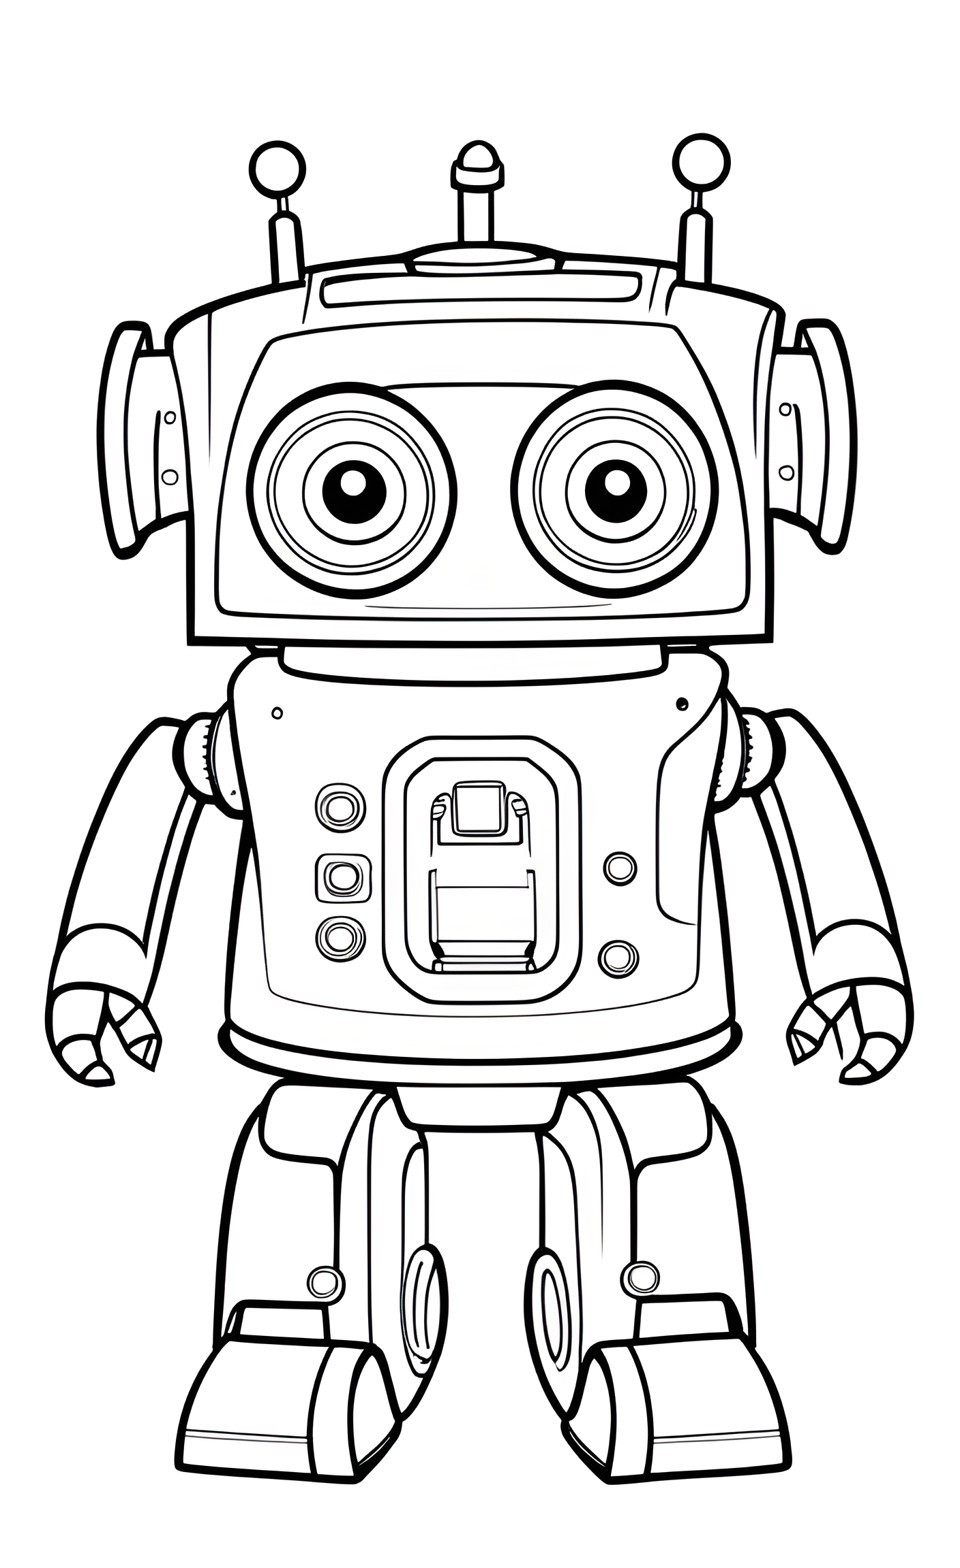 Simple Robot coloring pages for kids